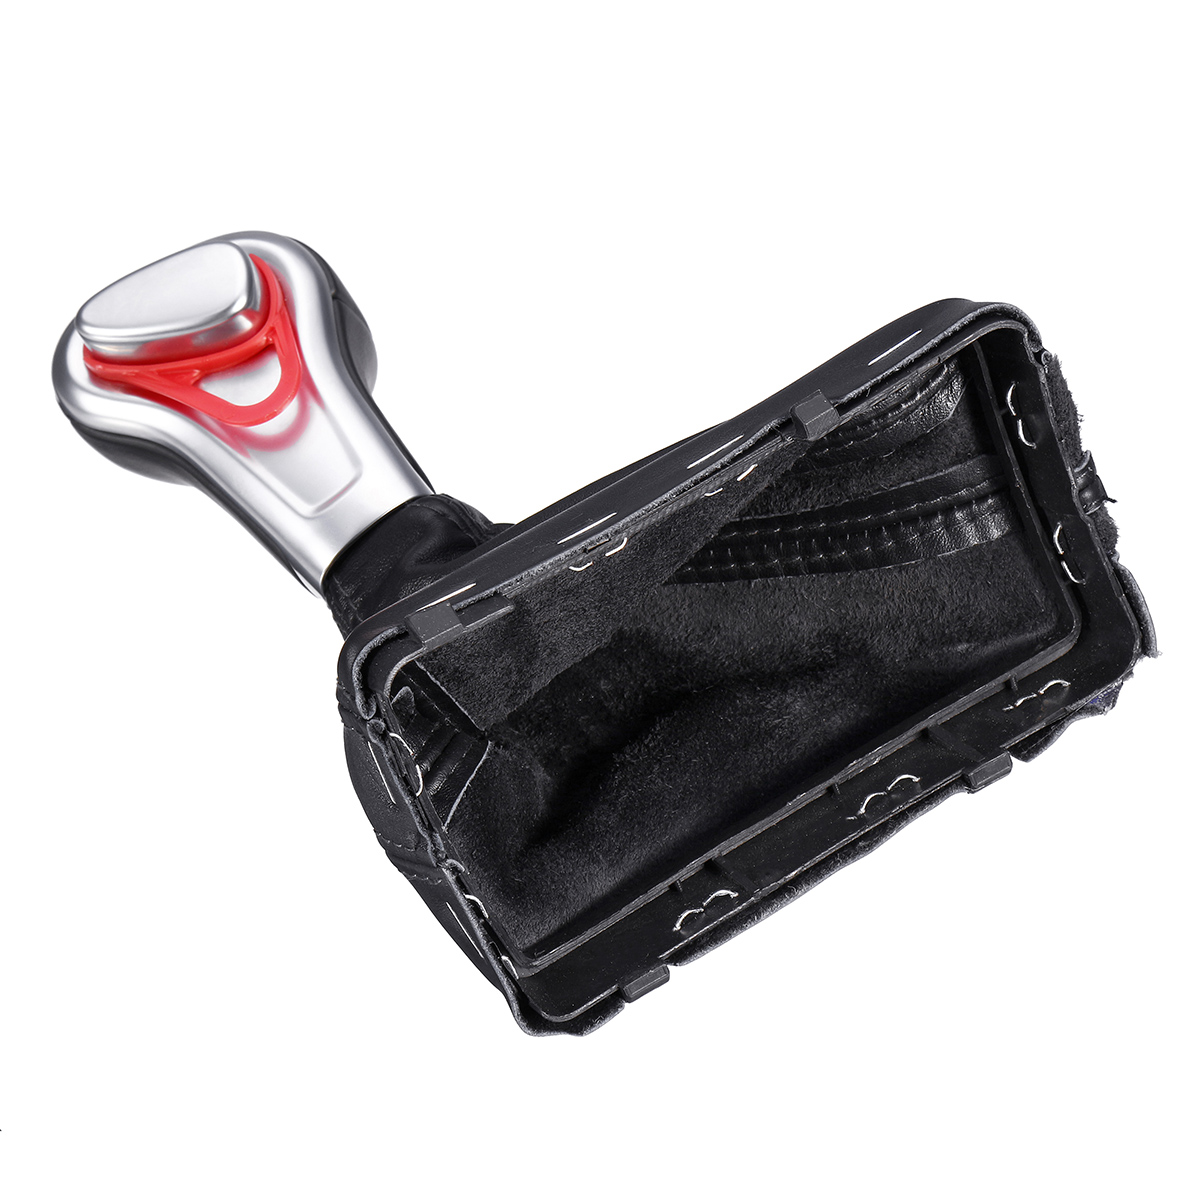 Gear Shift Knob with PU Leather Gaiter Boot Cover for Audi A4 A6 Q5 Q7 Left-Hand Drive